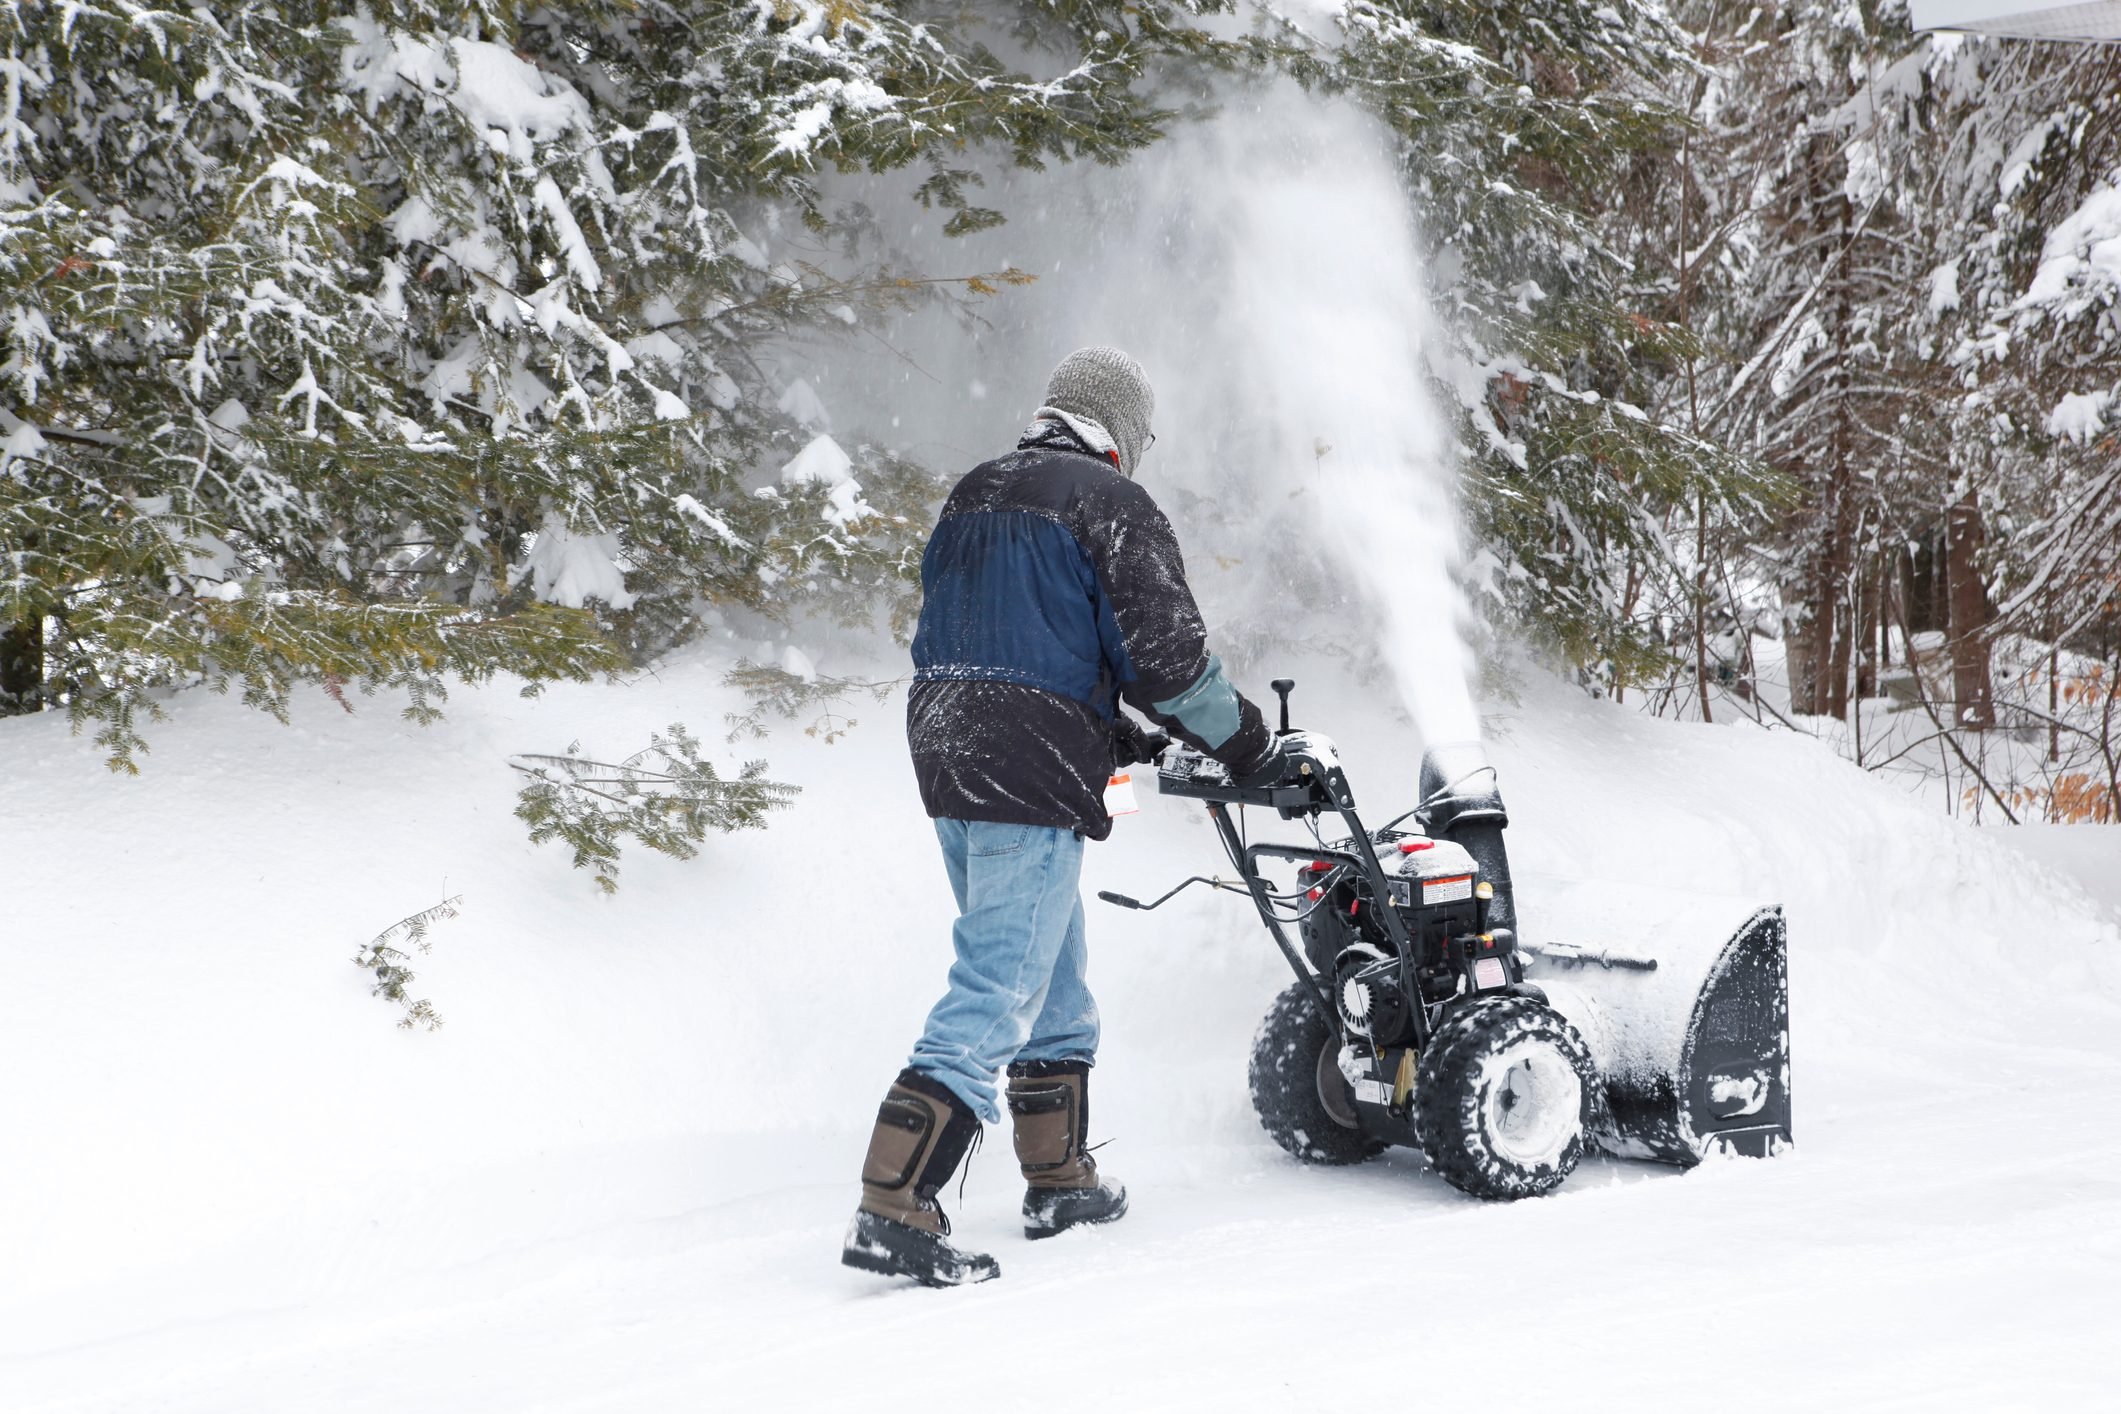 COMPLETE PACKAGE – 1X-2 Mini Snow Blower